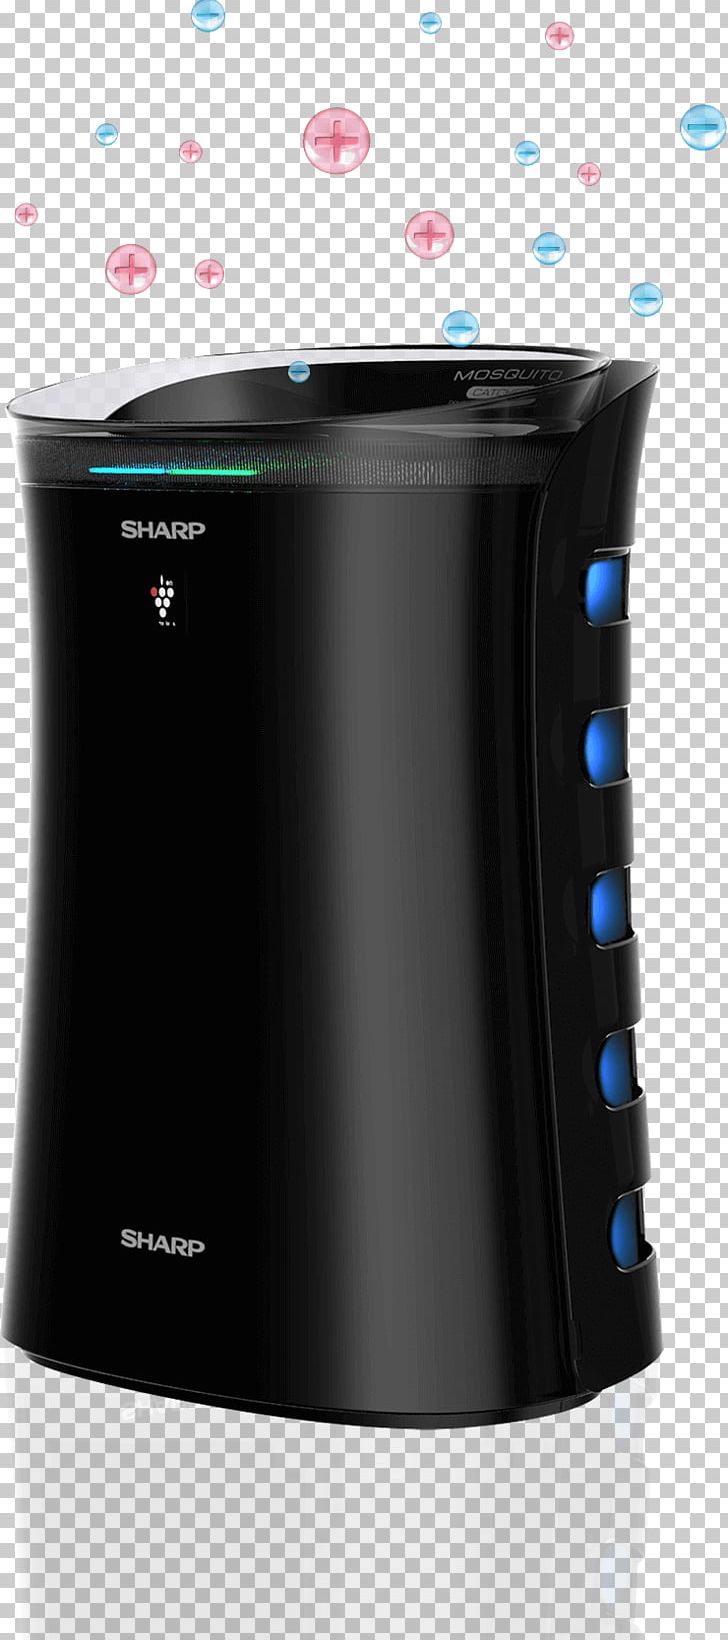 Air Purifiers Air Filter Sharp FP-A80UW Plasmacluster Air Purifier With HEPA Filter Mosquito PNG, Clipart, Air, Air Conditioning, Air Filter, Air Purifiers, Dust Free PNG Download